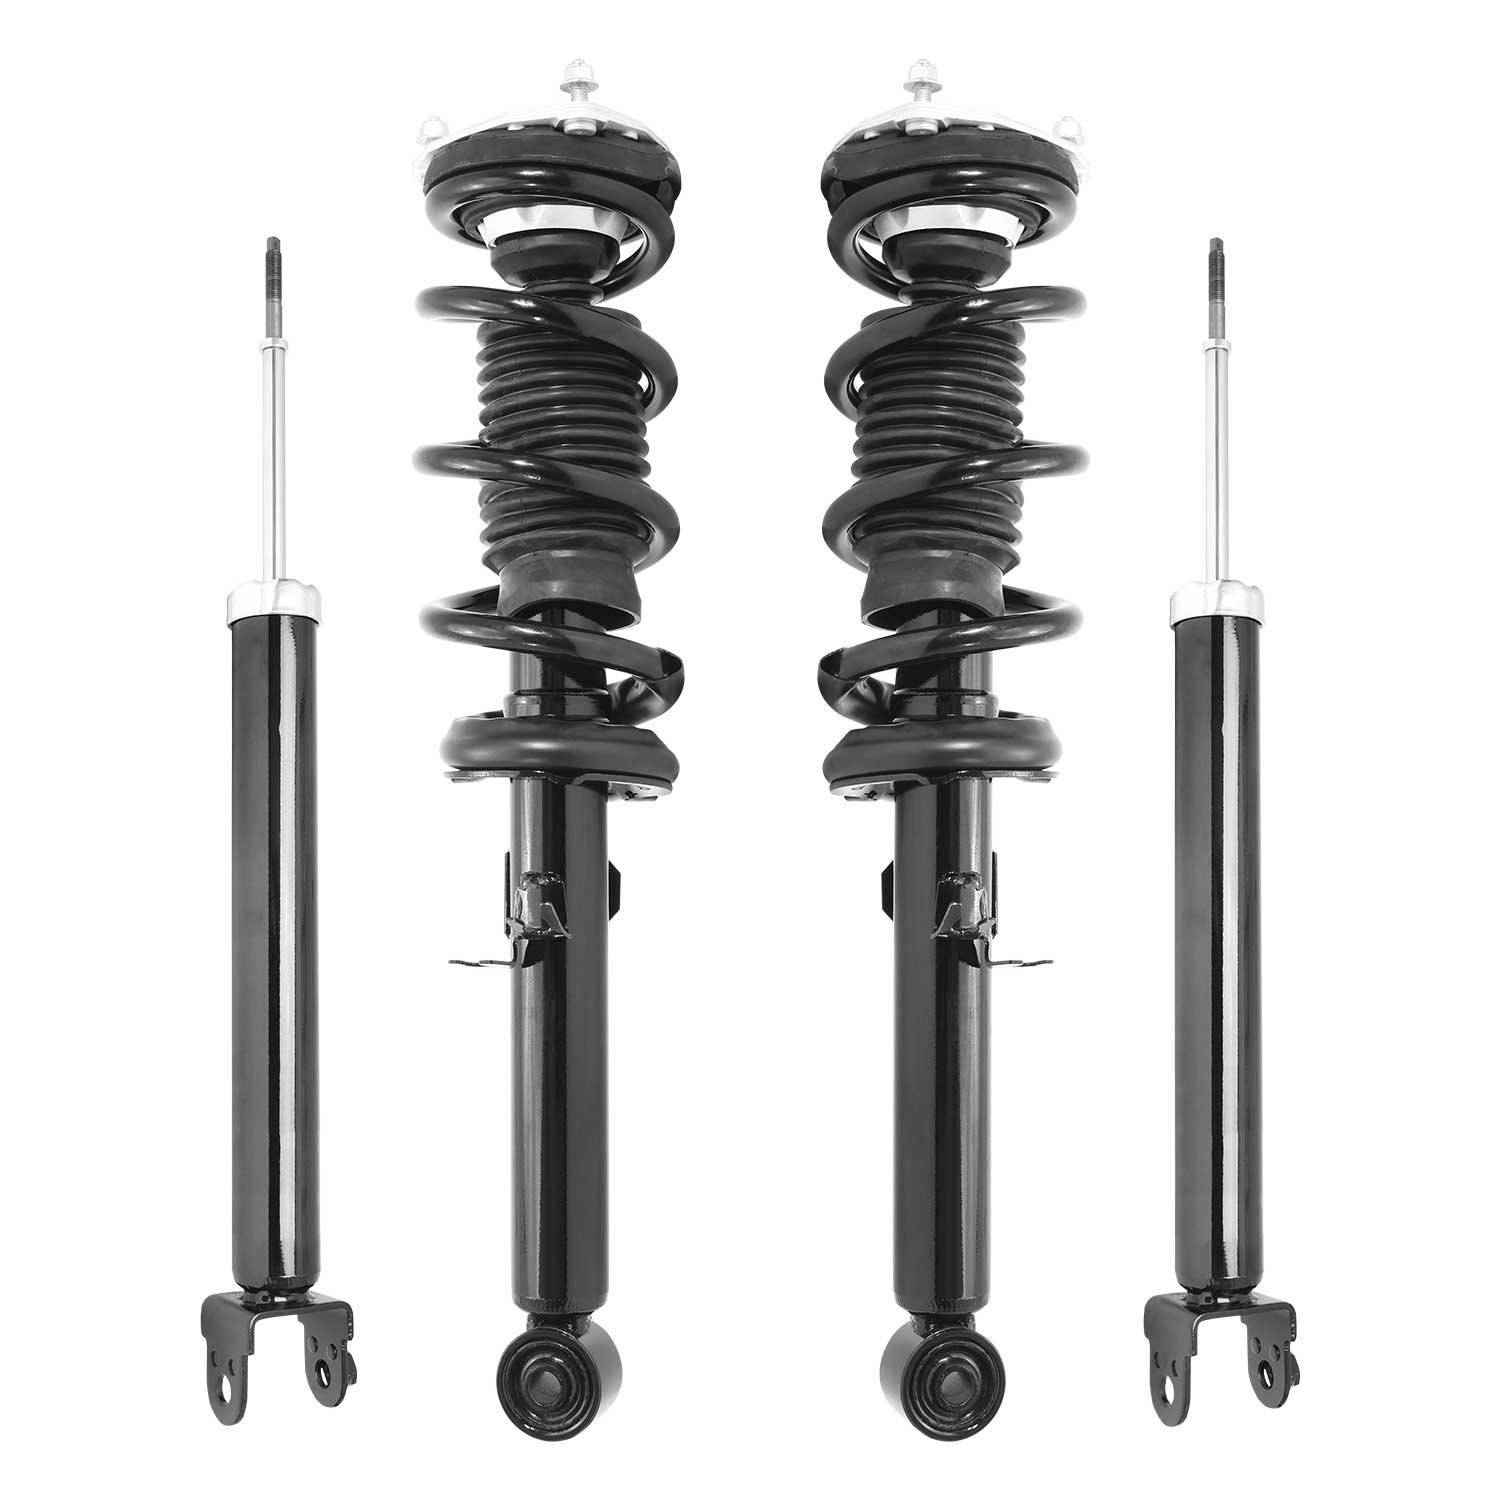 4-11413-255090-001 Front & Rear Suspension Strut & Coil Spring Assembly Fits Select Infiniti